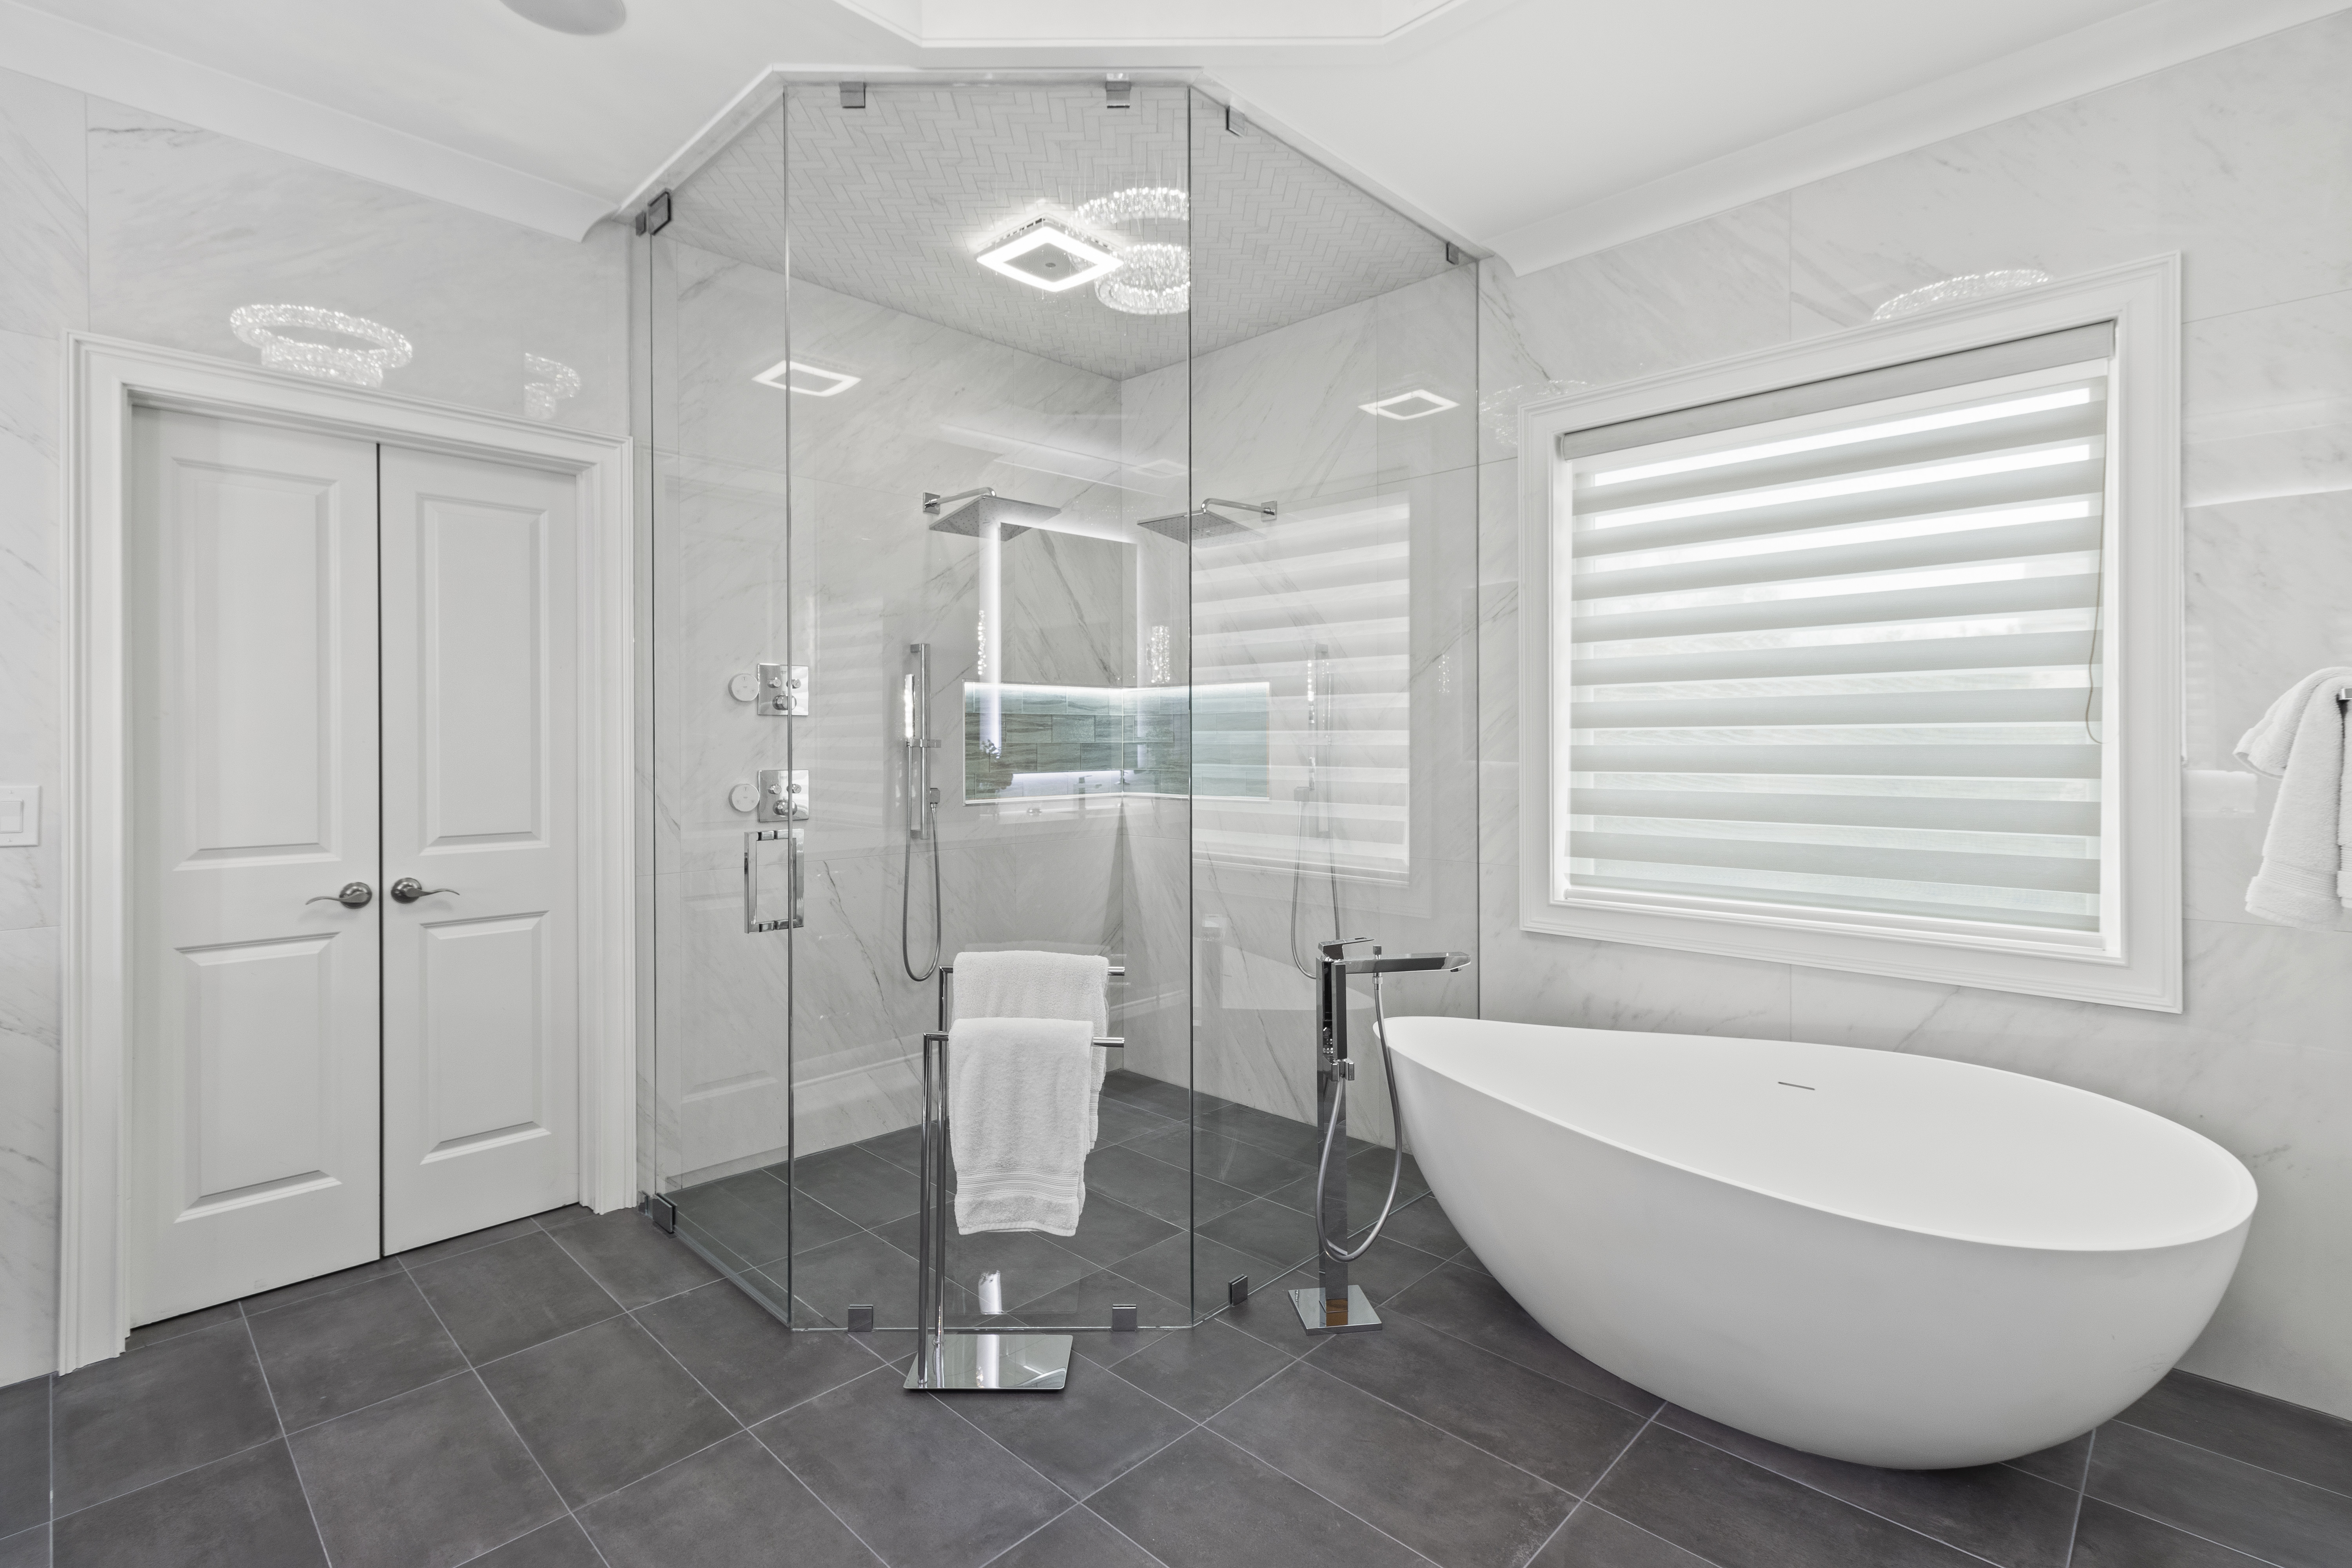 This stunning neo-angle shower completes the luxurious look of this new bathroom remodel by Stephenson Construction. 